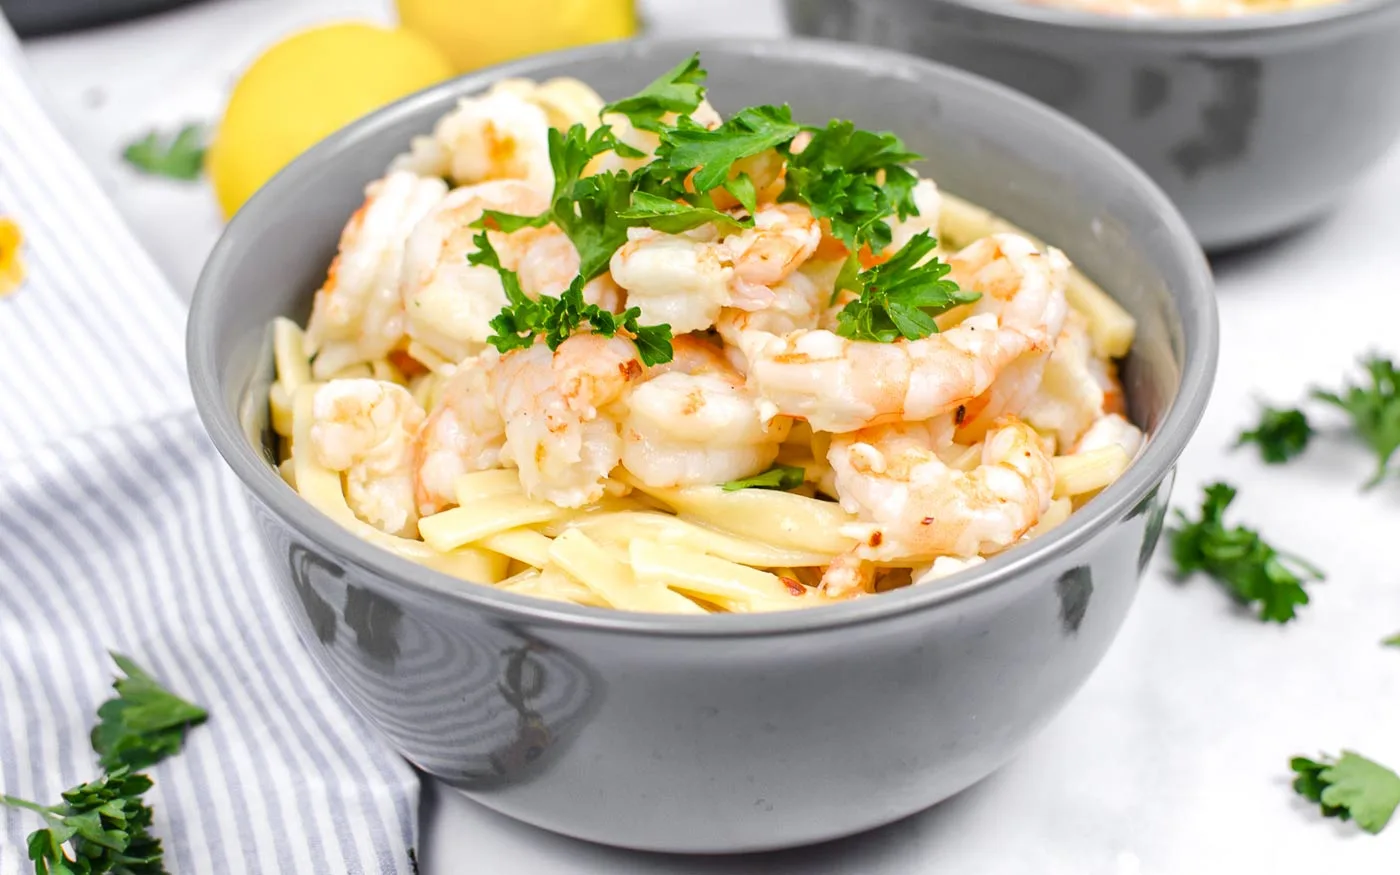 Instant Pot Shrimp Scampi topped with parsley in a gray bowl